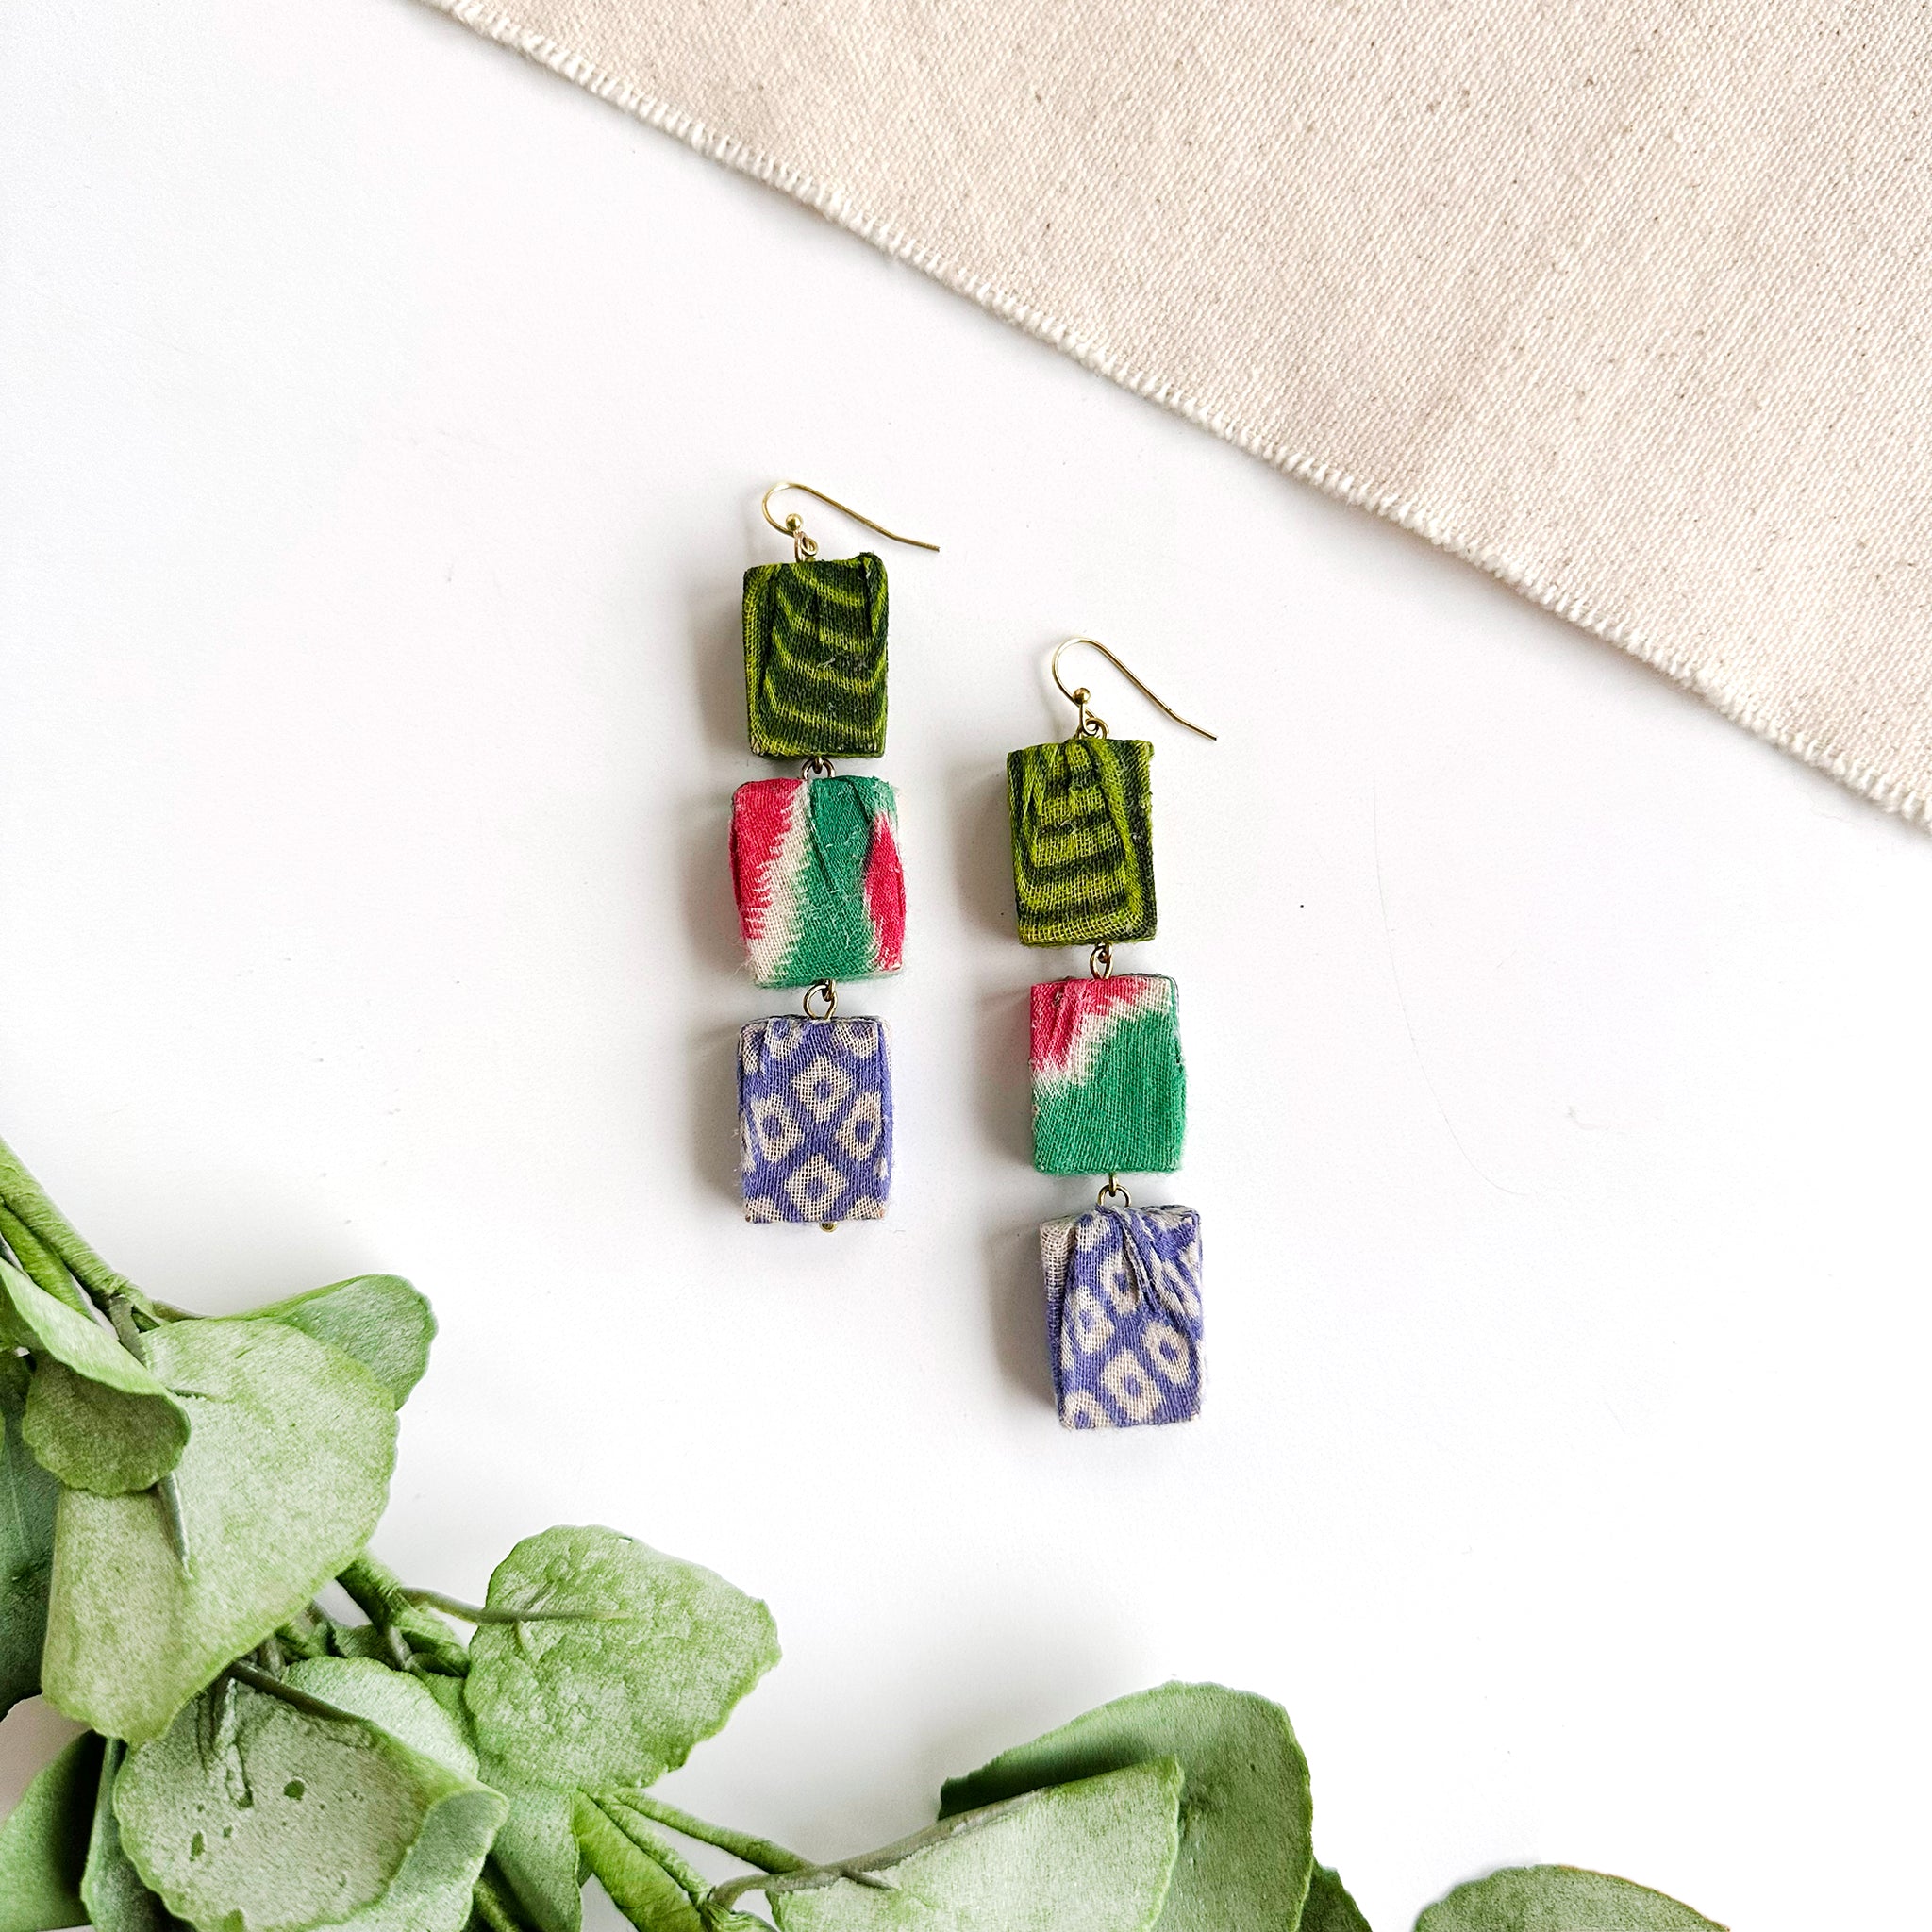 A pair of earrings is shown. These earrings are formed with three rectangular beads hanging vertically from ear wires.